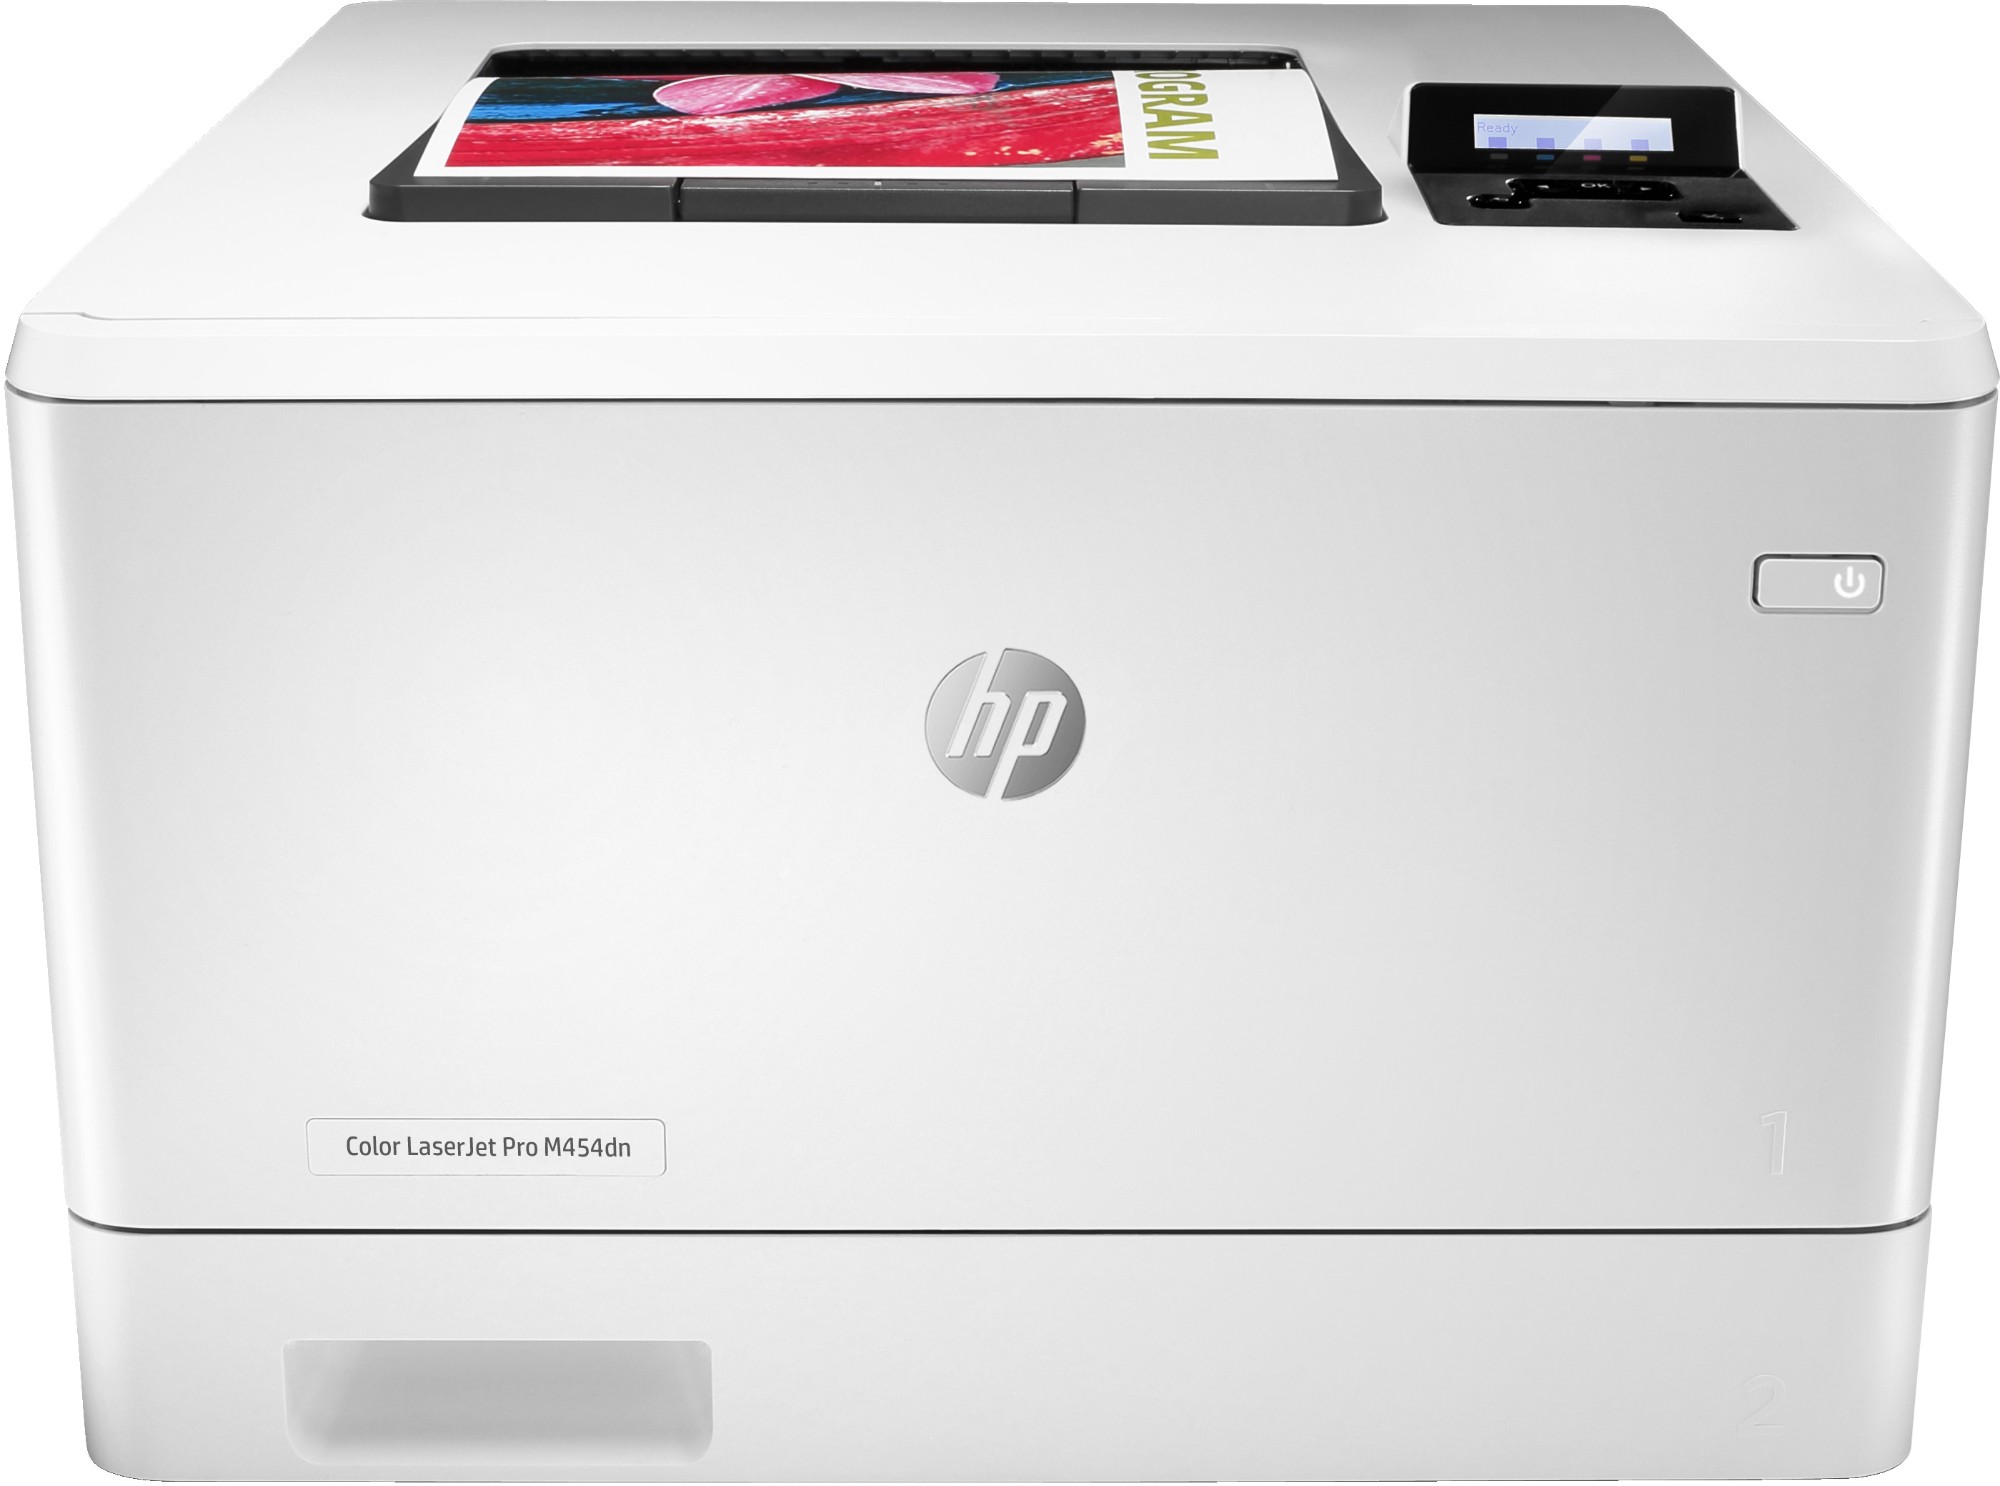 HP Colour LaserJet Pro M454dn, Print, Two-sided printing